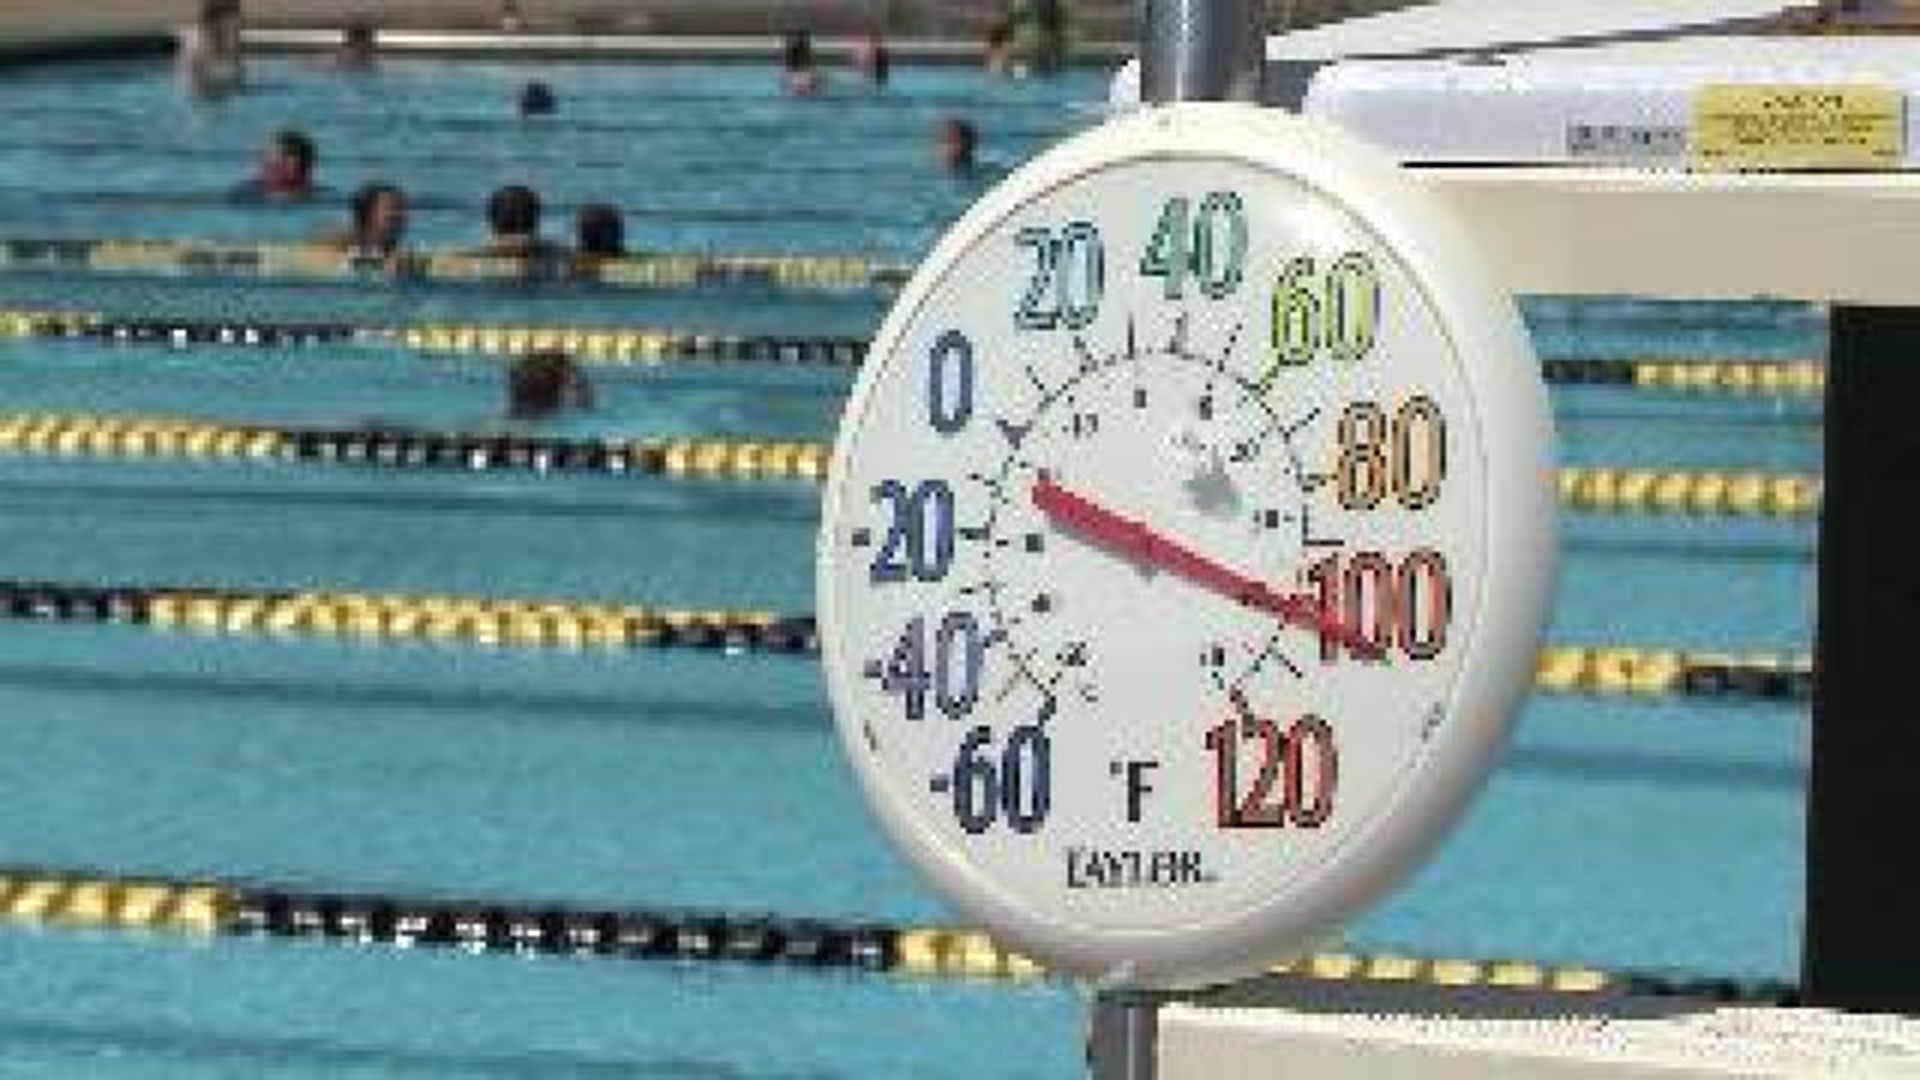 Wrapping Up Summer Fun at Local Pool